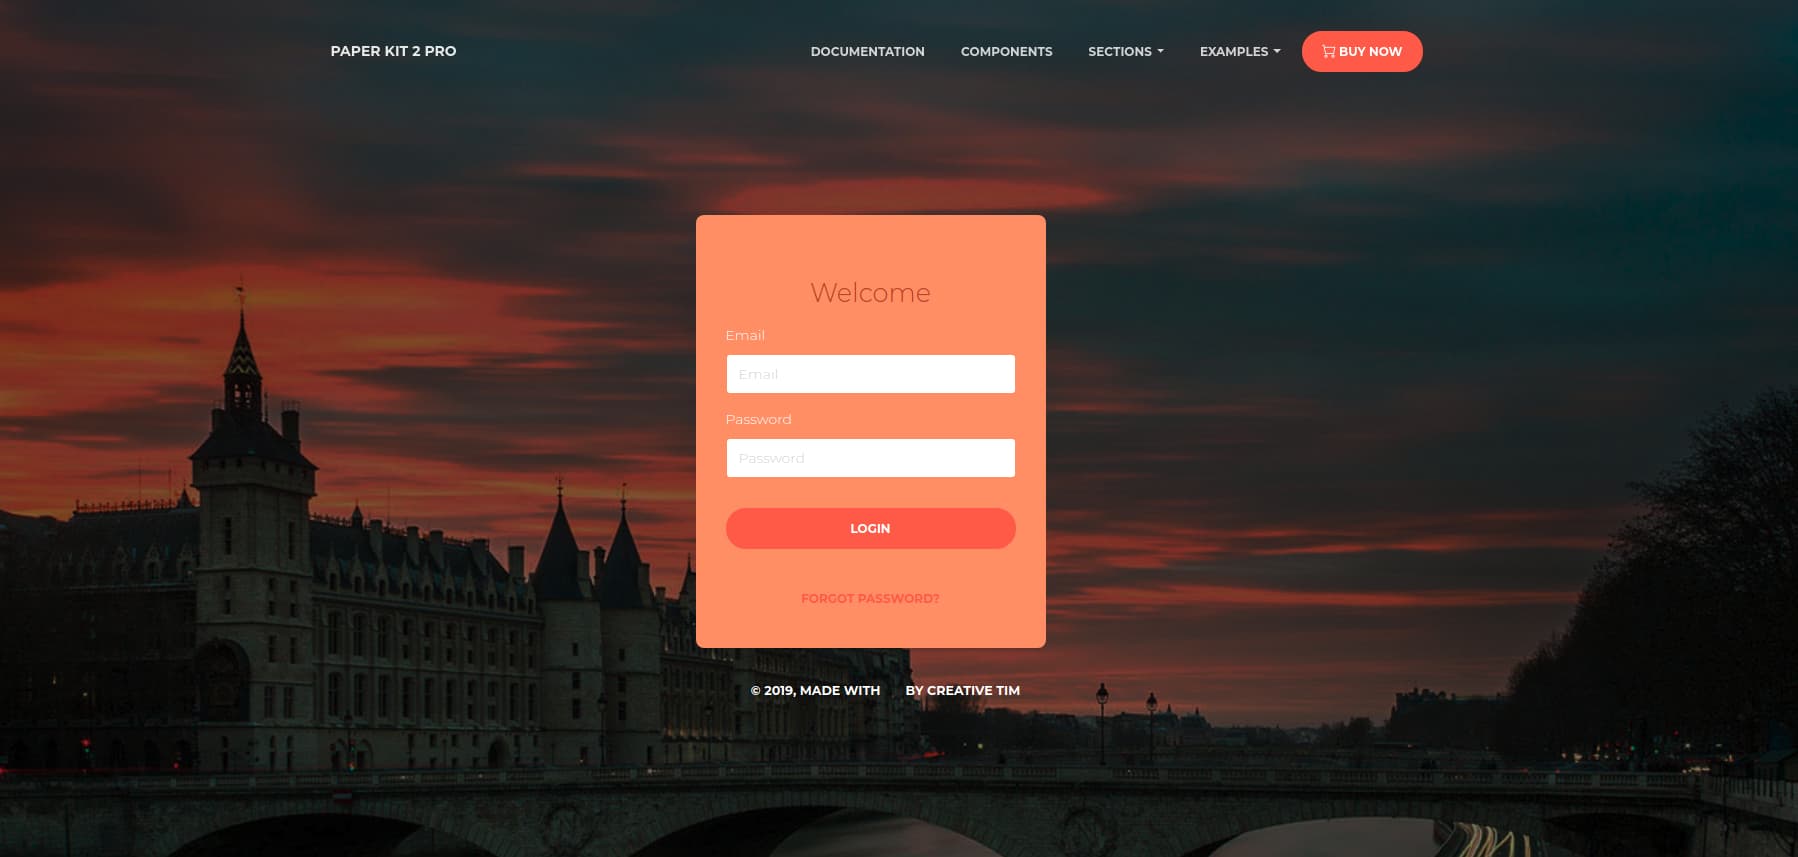 paperkit 2 pro login page template